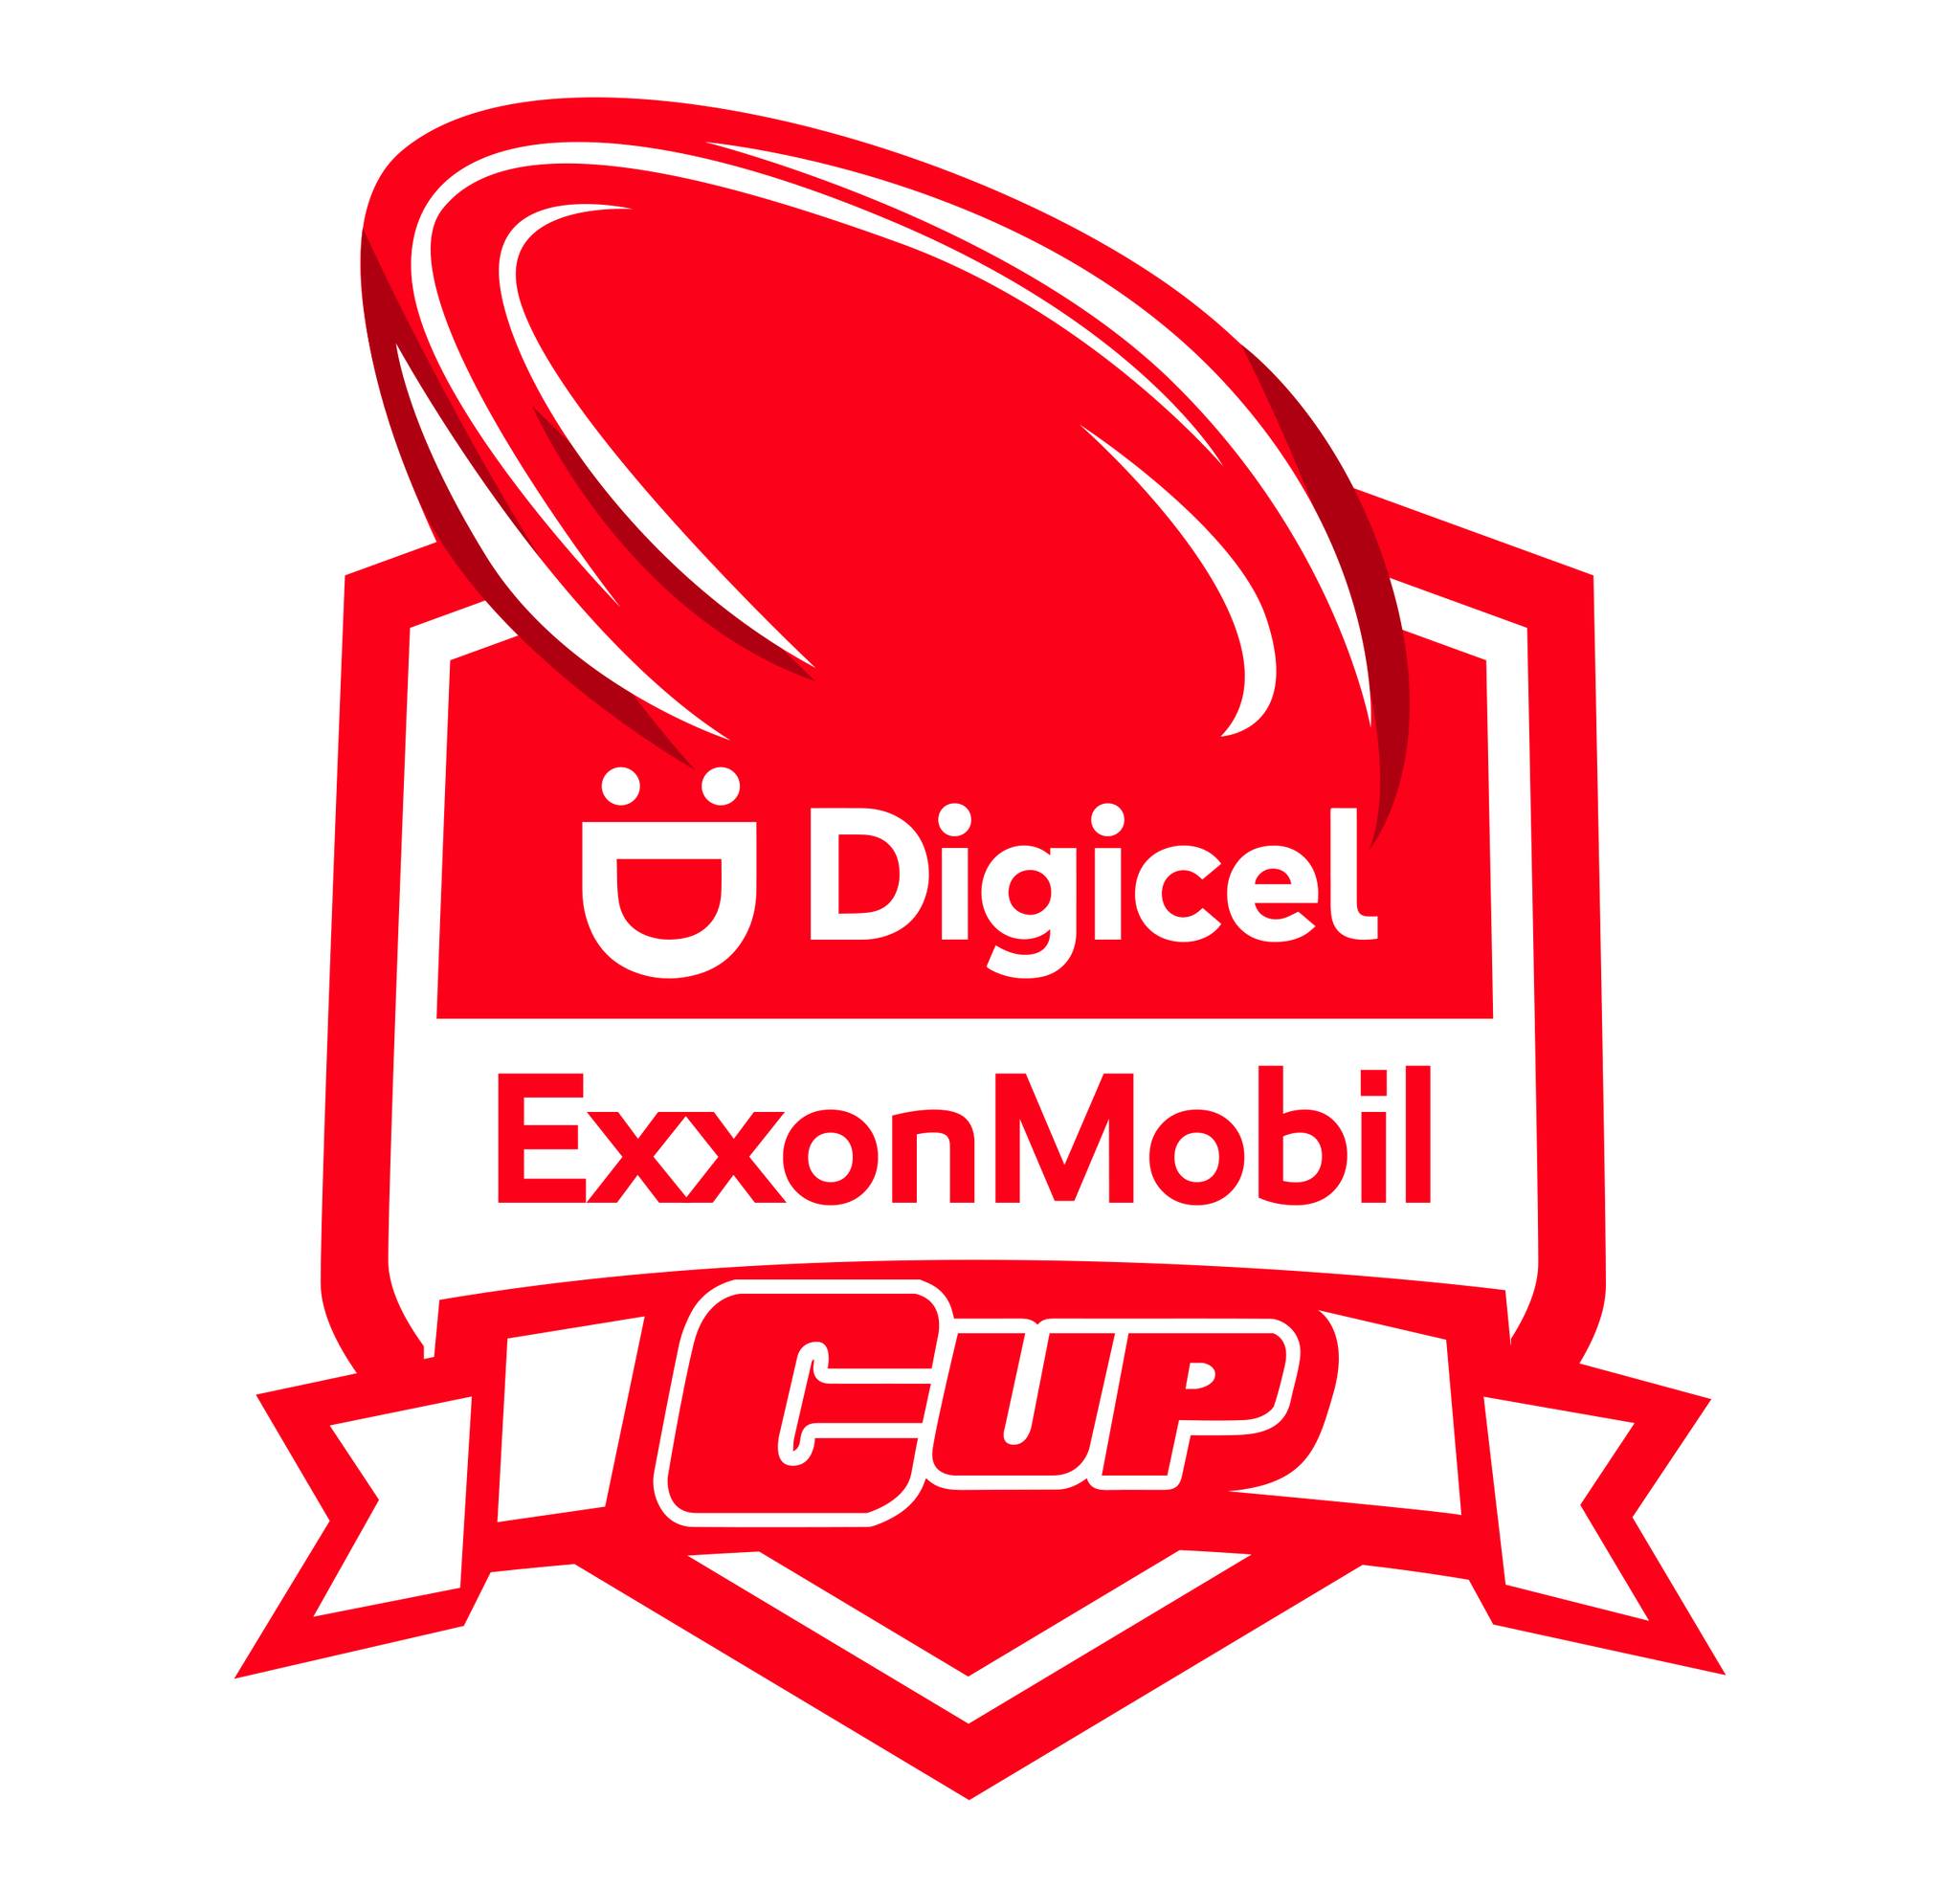 Game Day! Round 7 of the 2023 Digicel ExxonMobil Cup kicks off in Kimbe and Kokopo today.